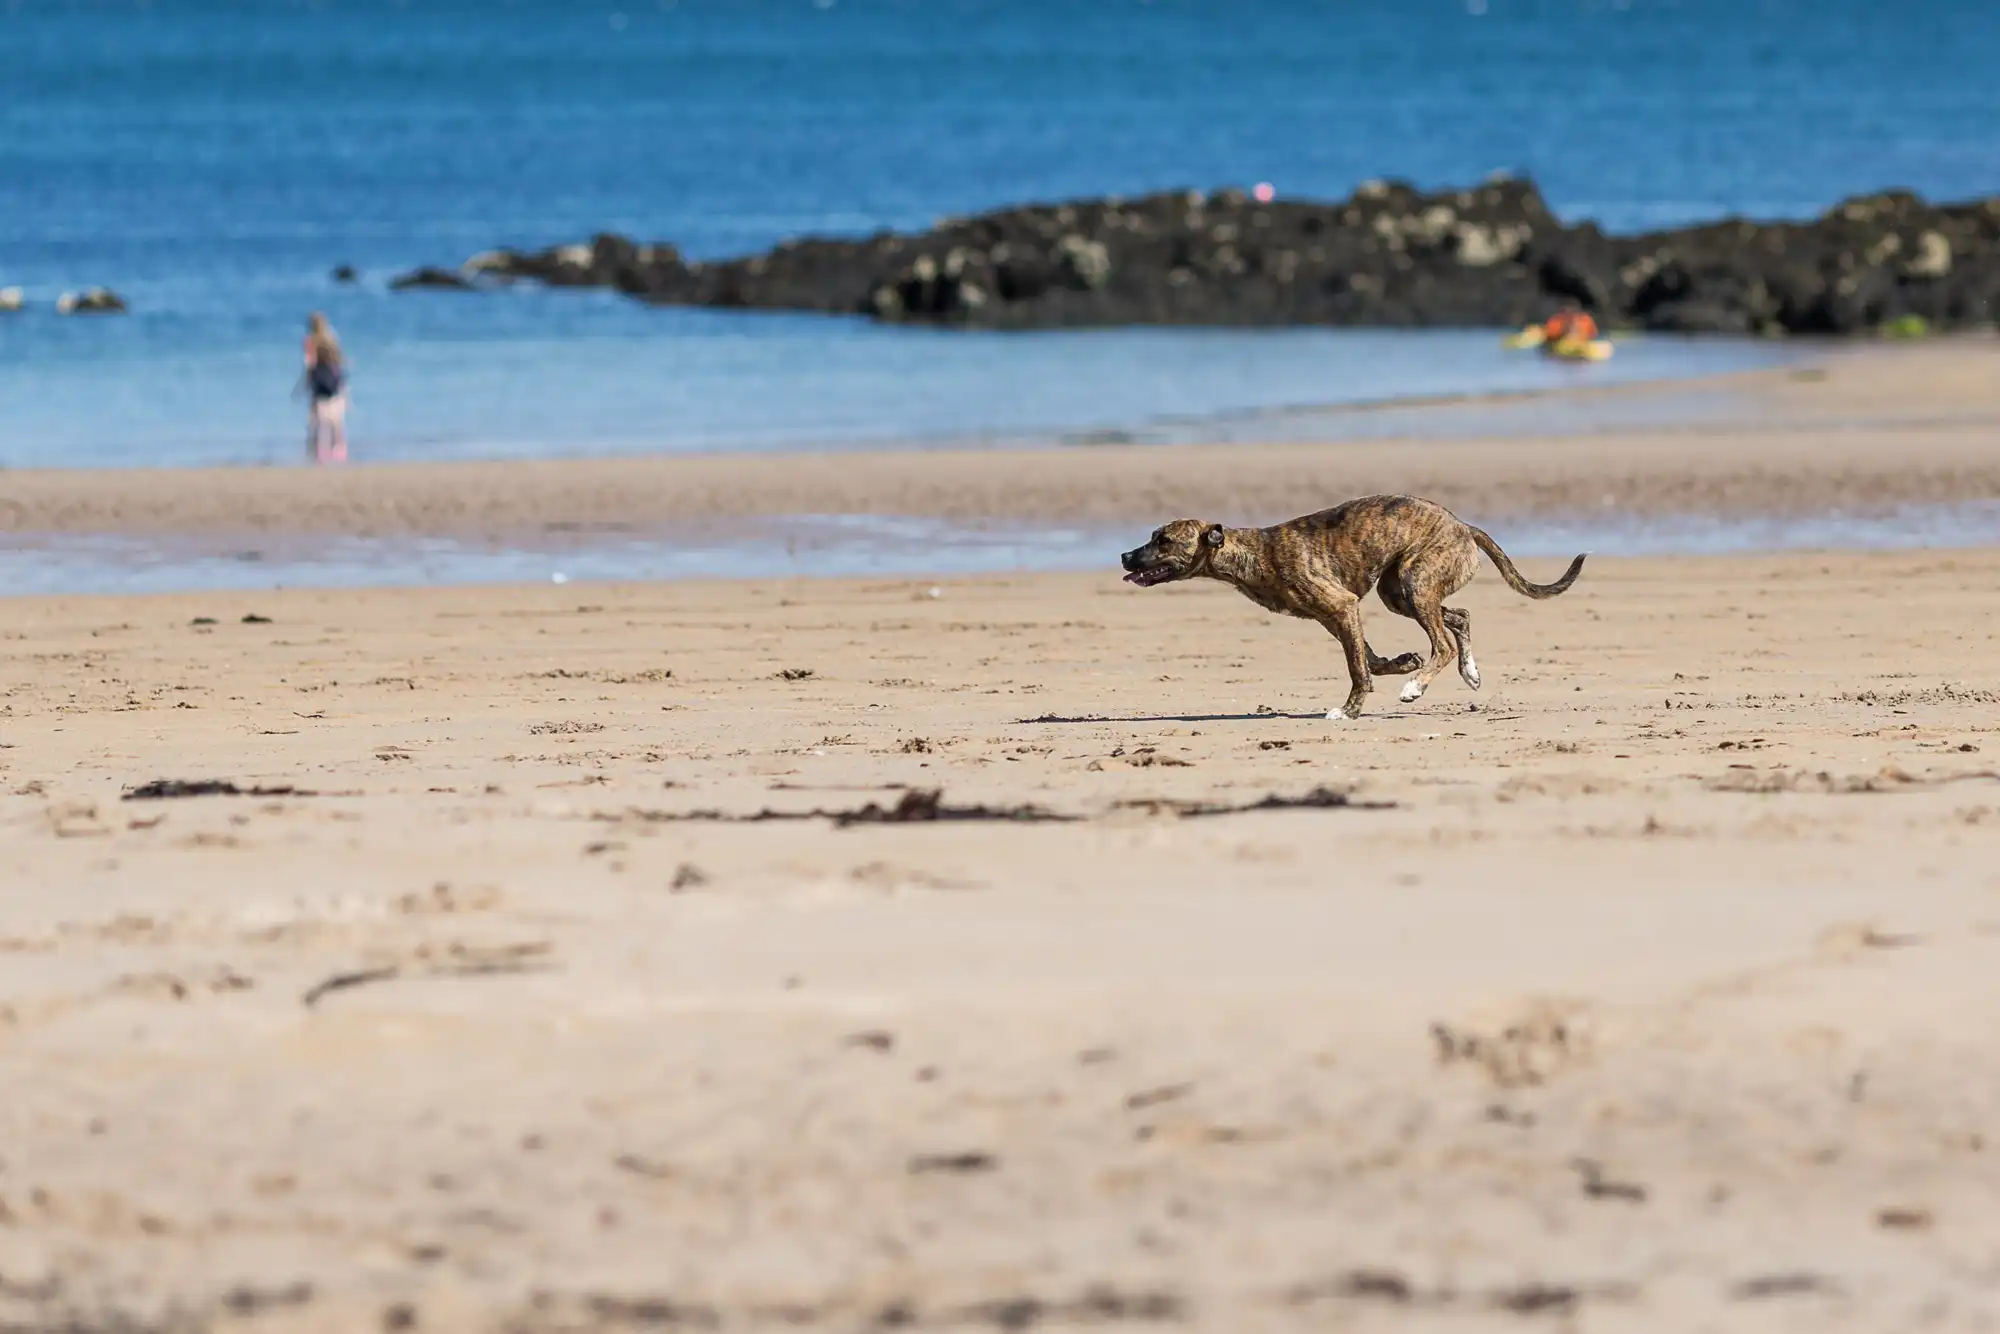 A dog running across a sandy beach with a person and kayaks visible in the background by the water.